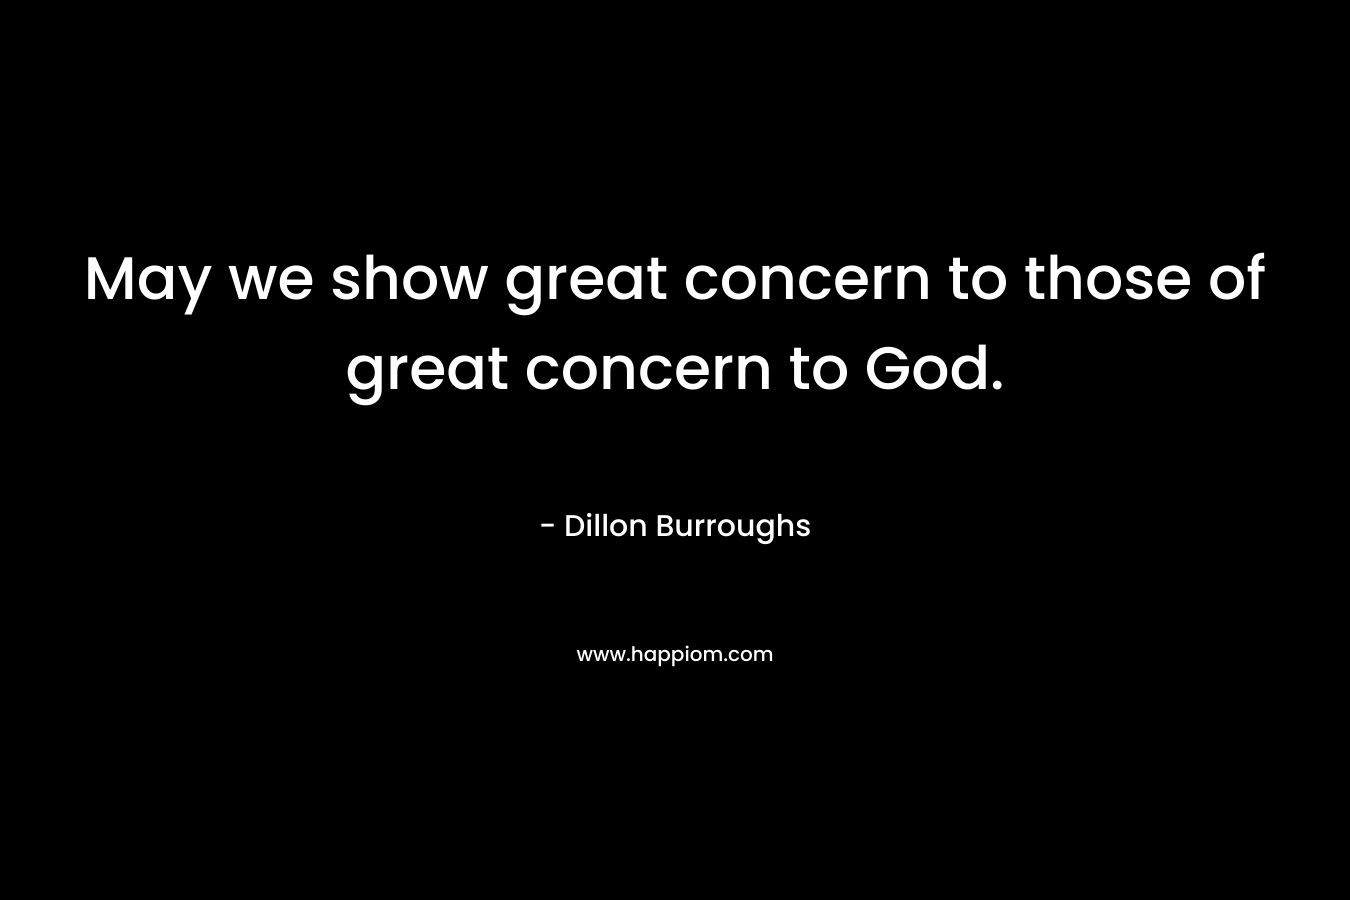 May we show great concern to those of great concern to God.